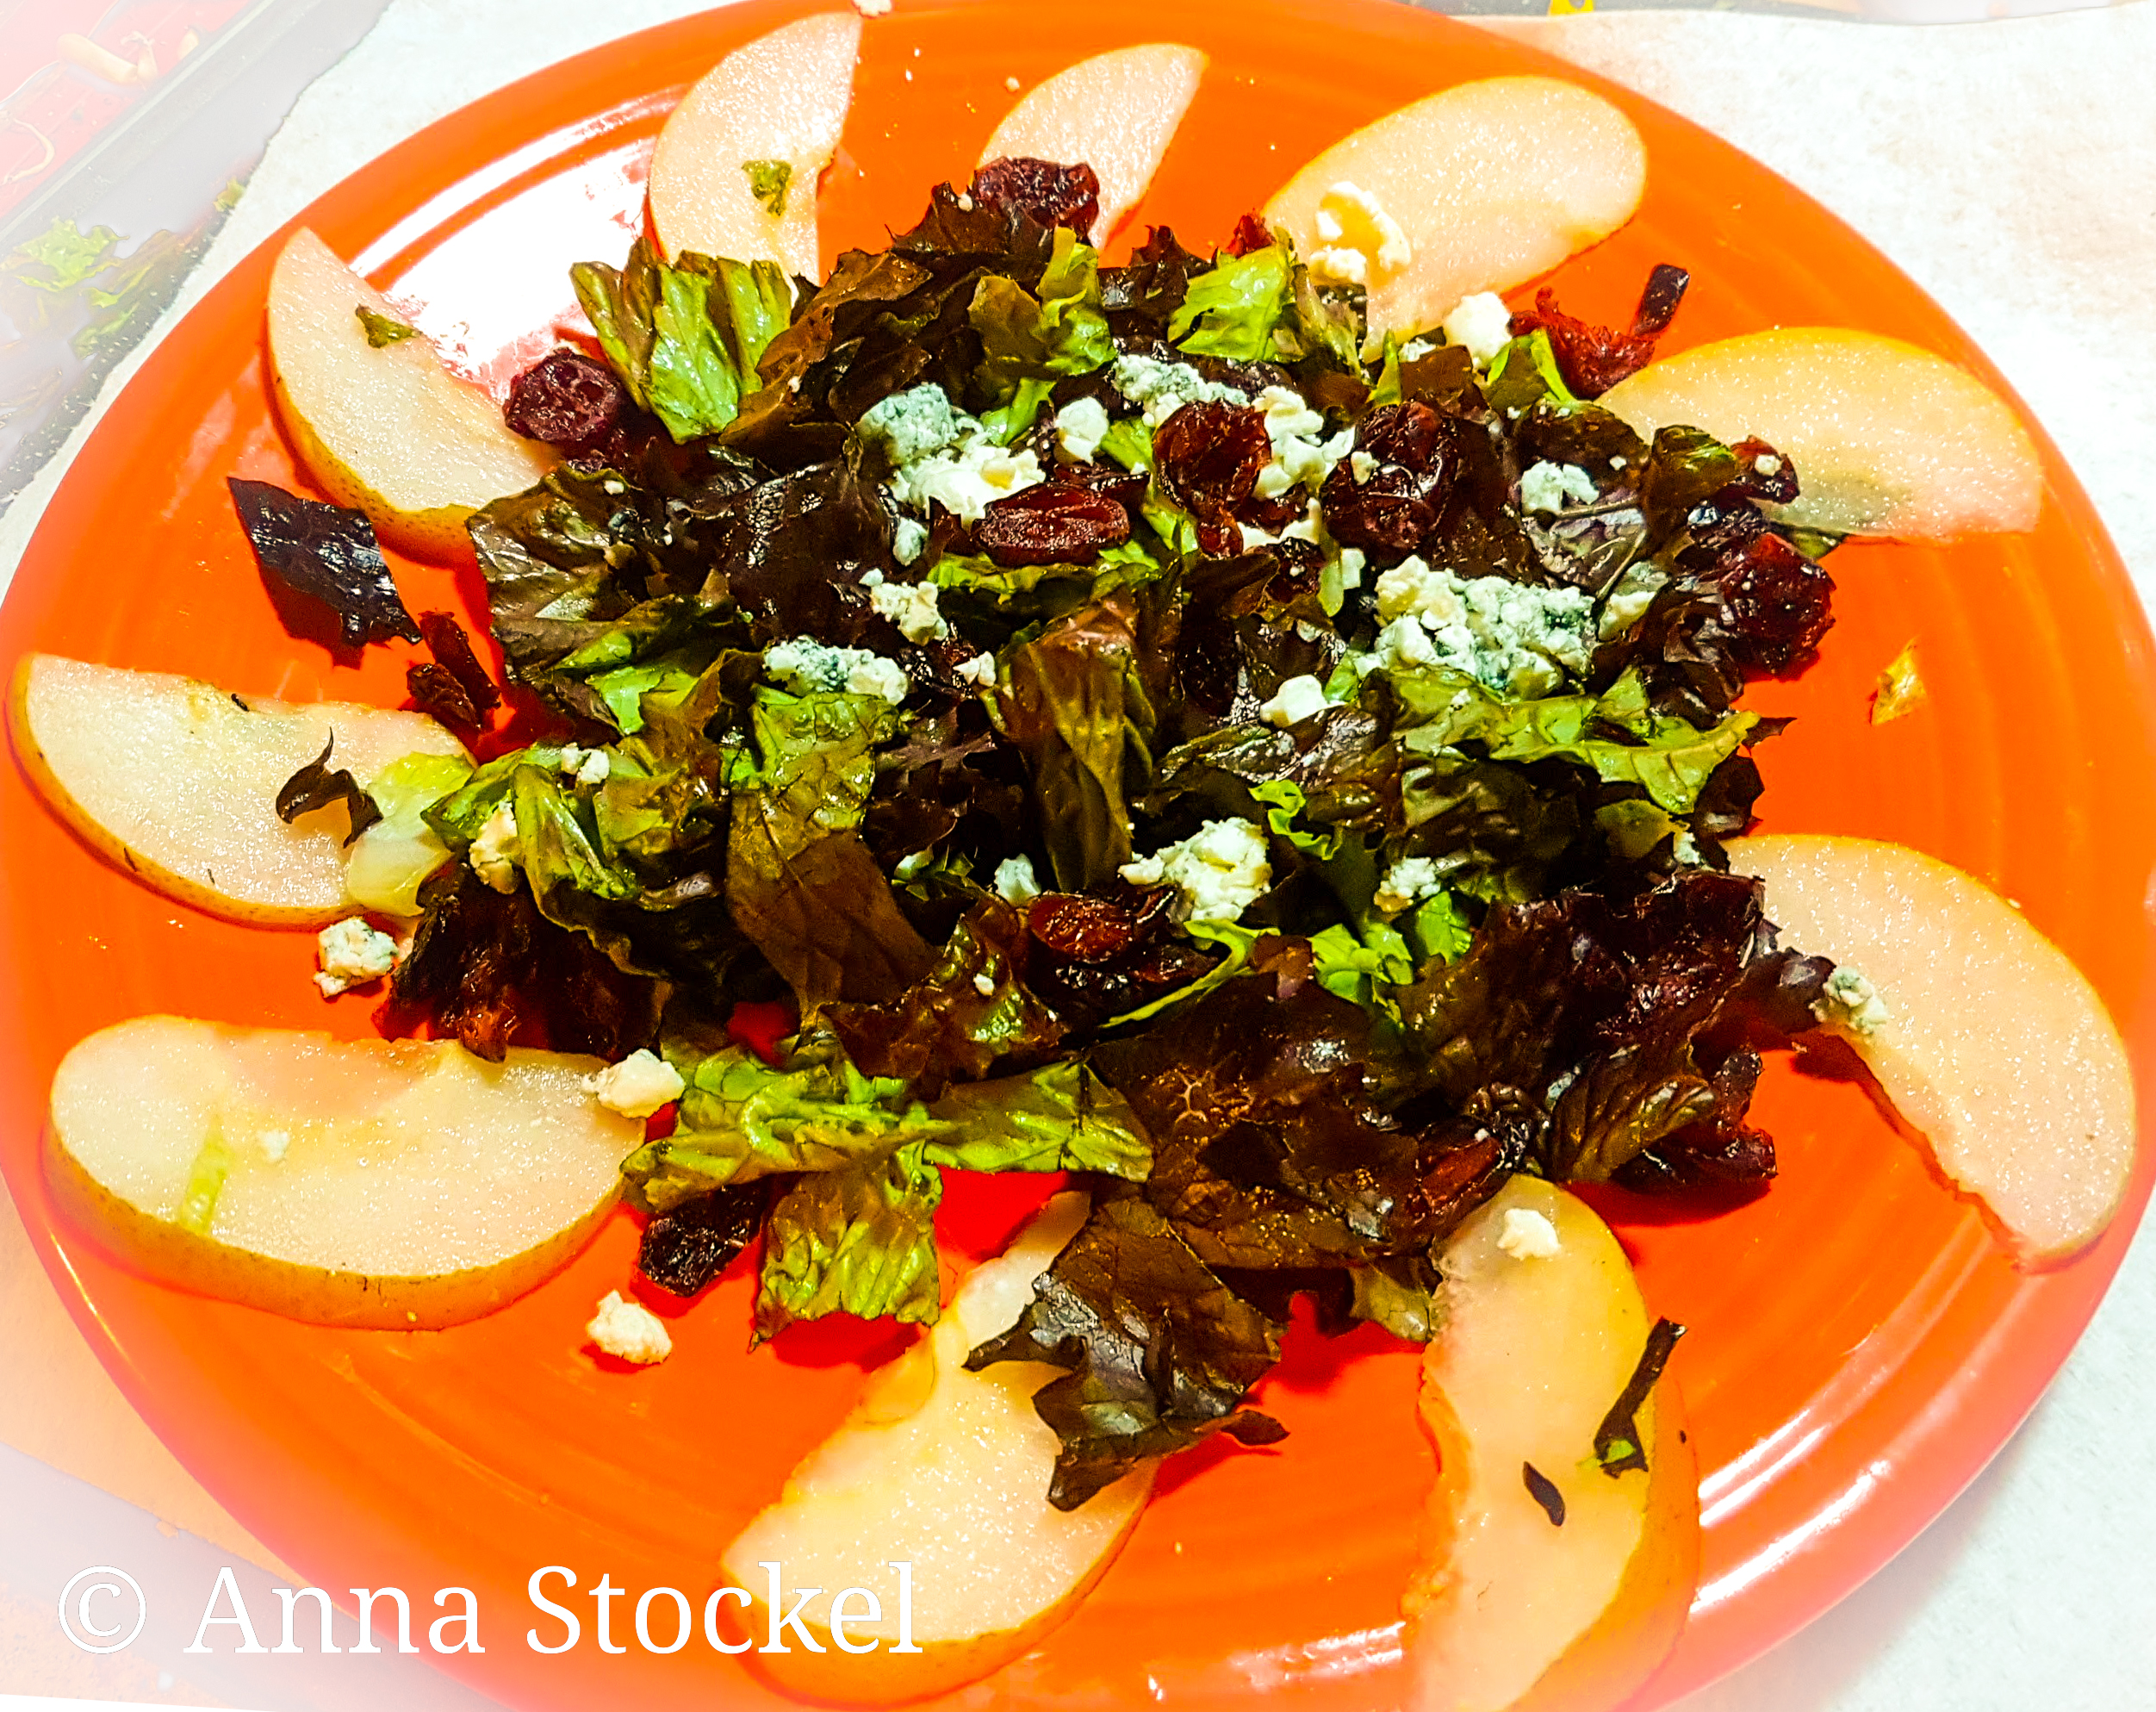 Pear and Red Leaf Lettuce Salad with Walnuts, Dried Cranberries, and Blue Cheese image